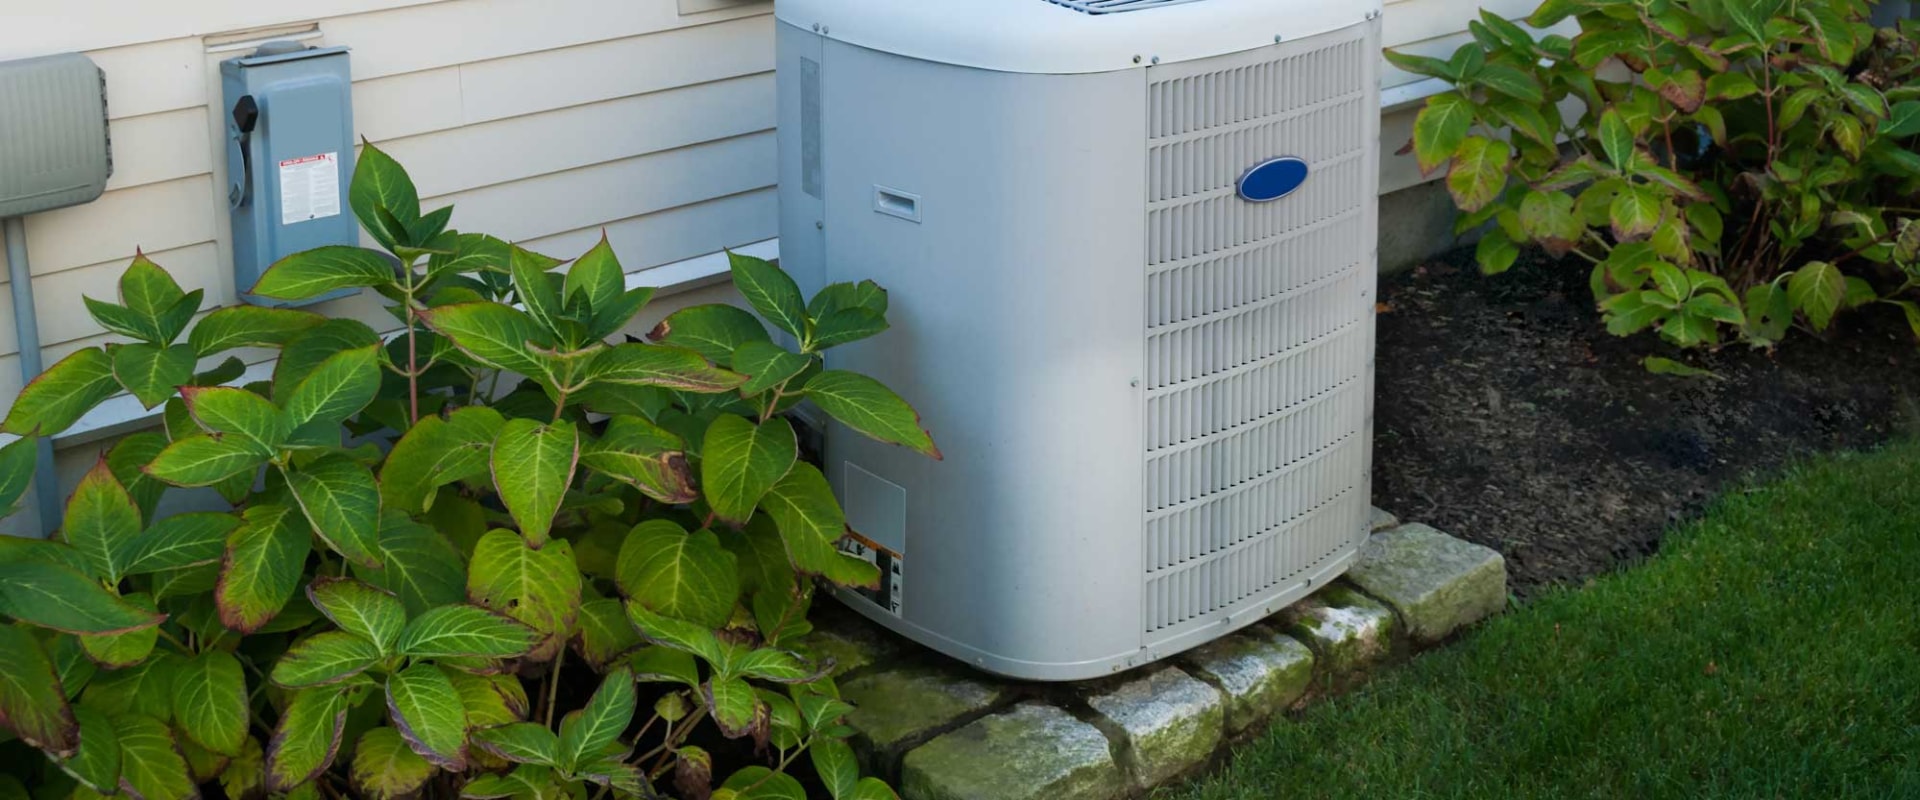 Should You Repair or Replace Your Air Conditioner?